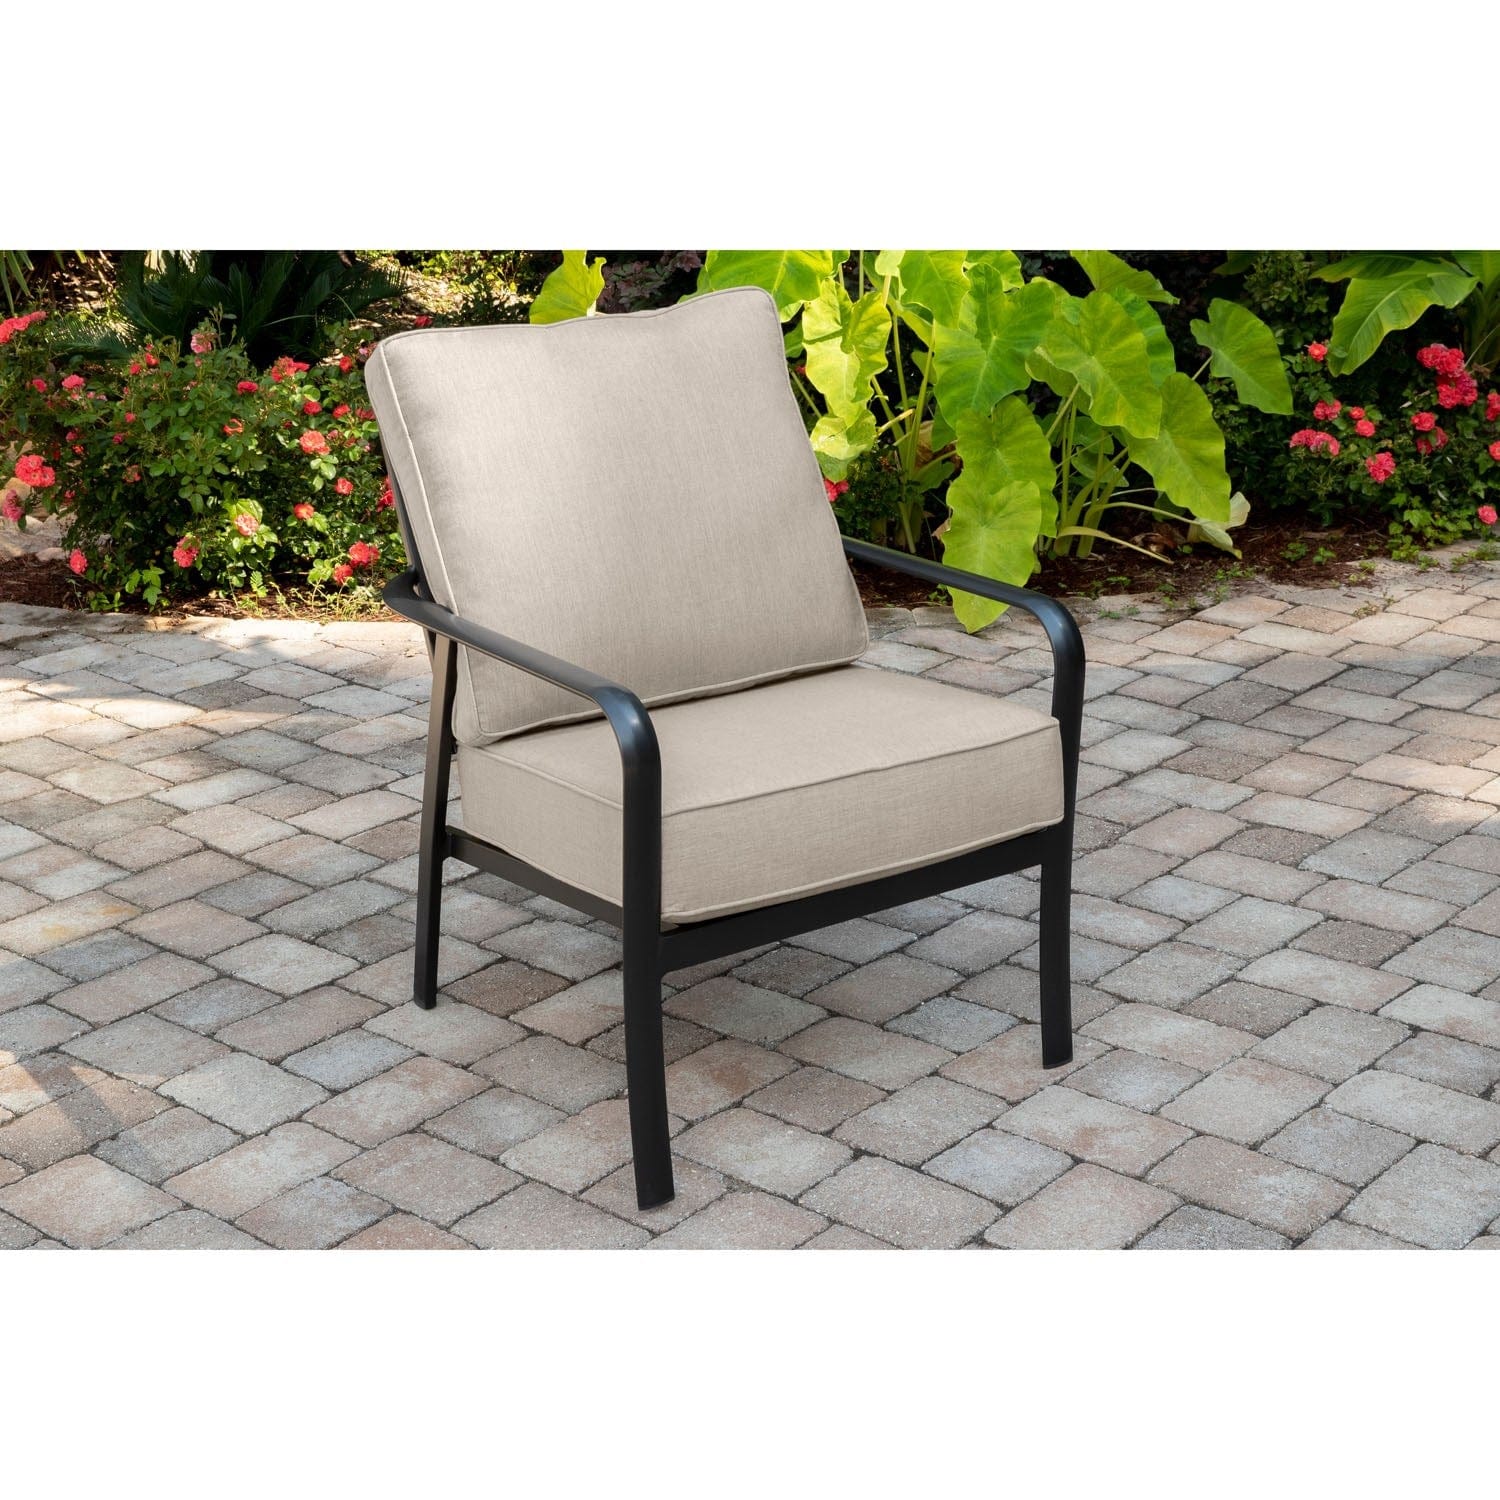 Hanover Conversation Set Cortino 4-Piece Commercial-Grade Patio Seating Set with 2 Cushioned Club Chairs, Loveseat, and Slat-Top Coffee Table, CORT4PCL-ASH